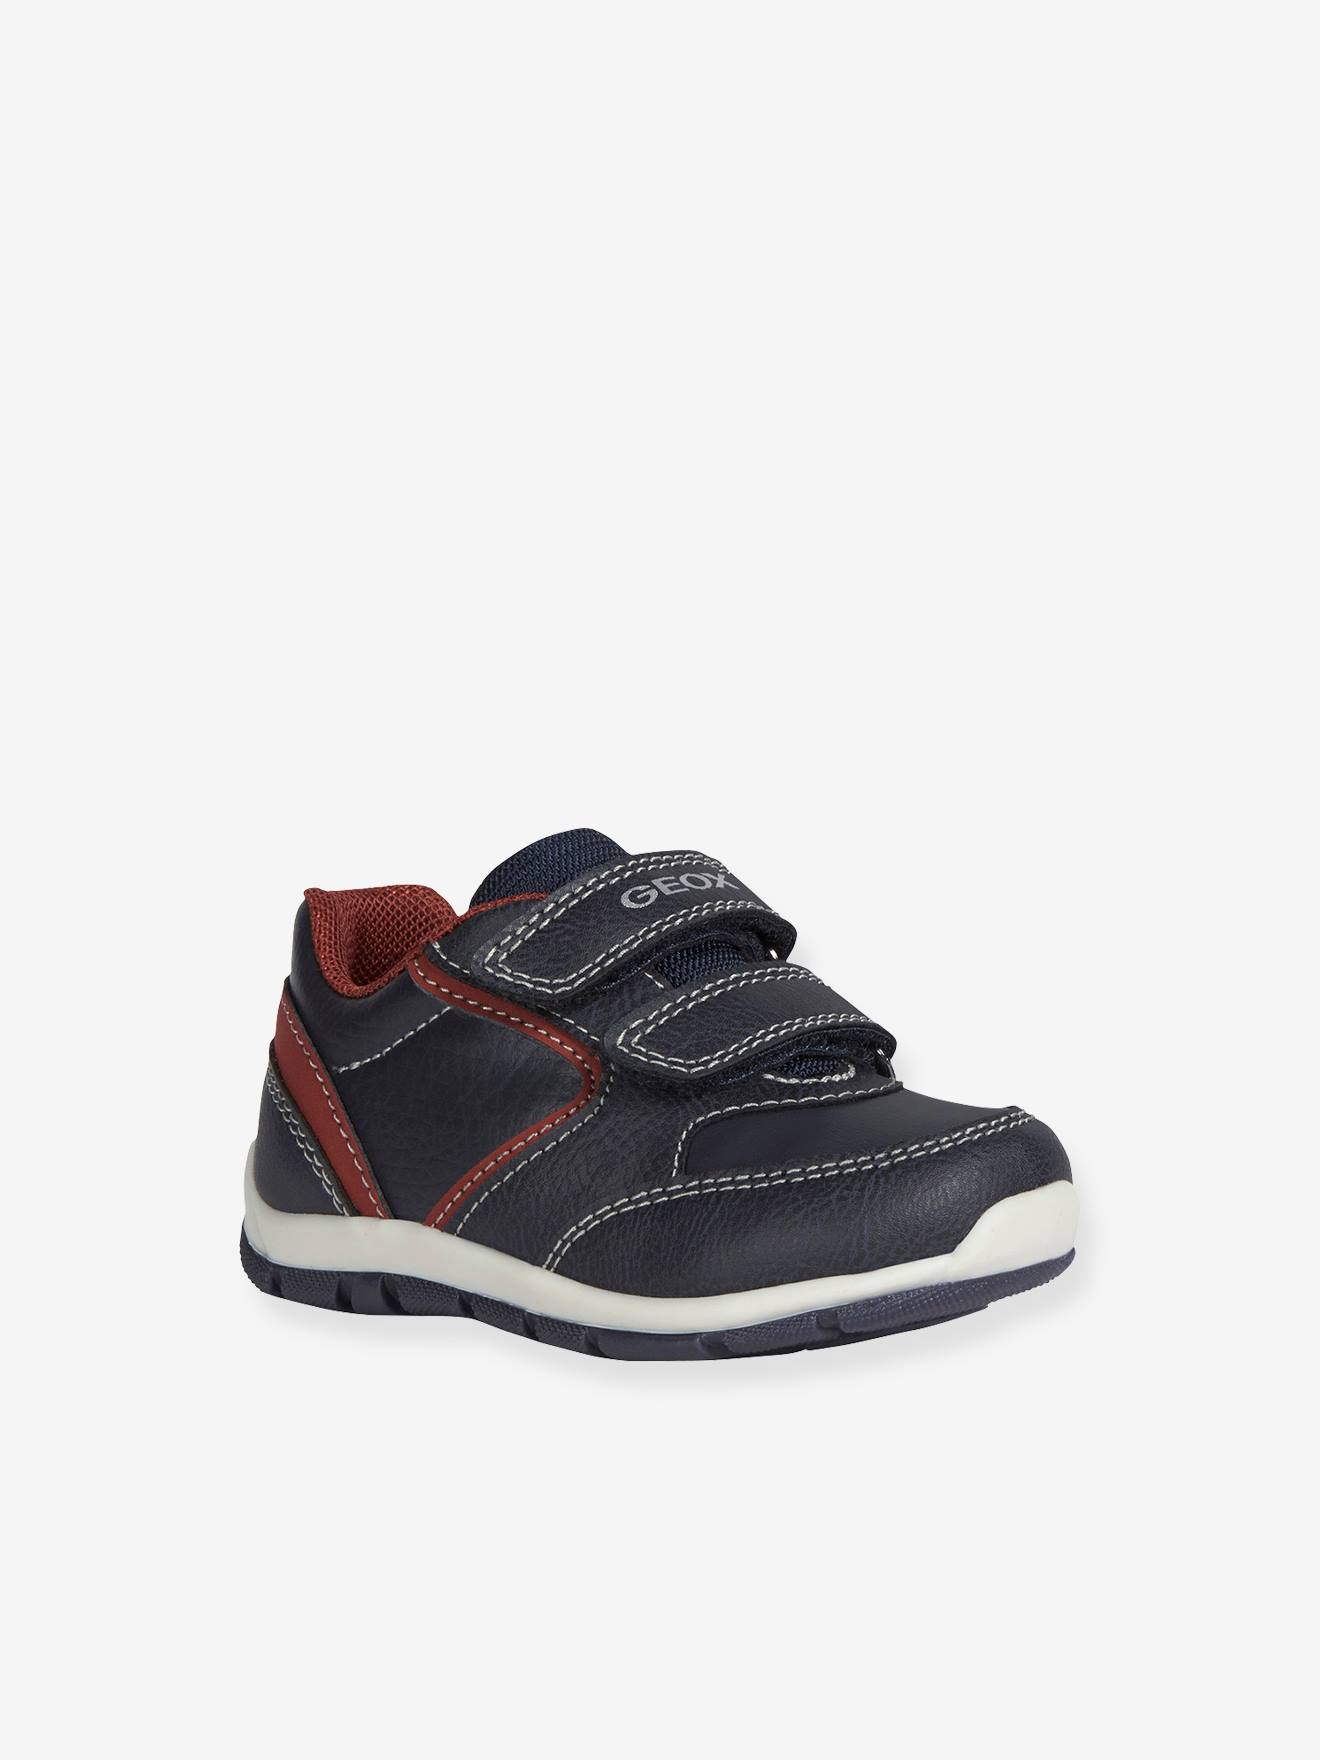 trainers for baby boy